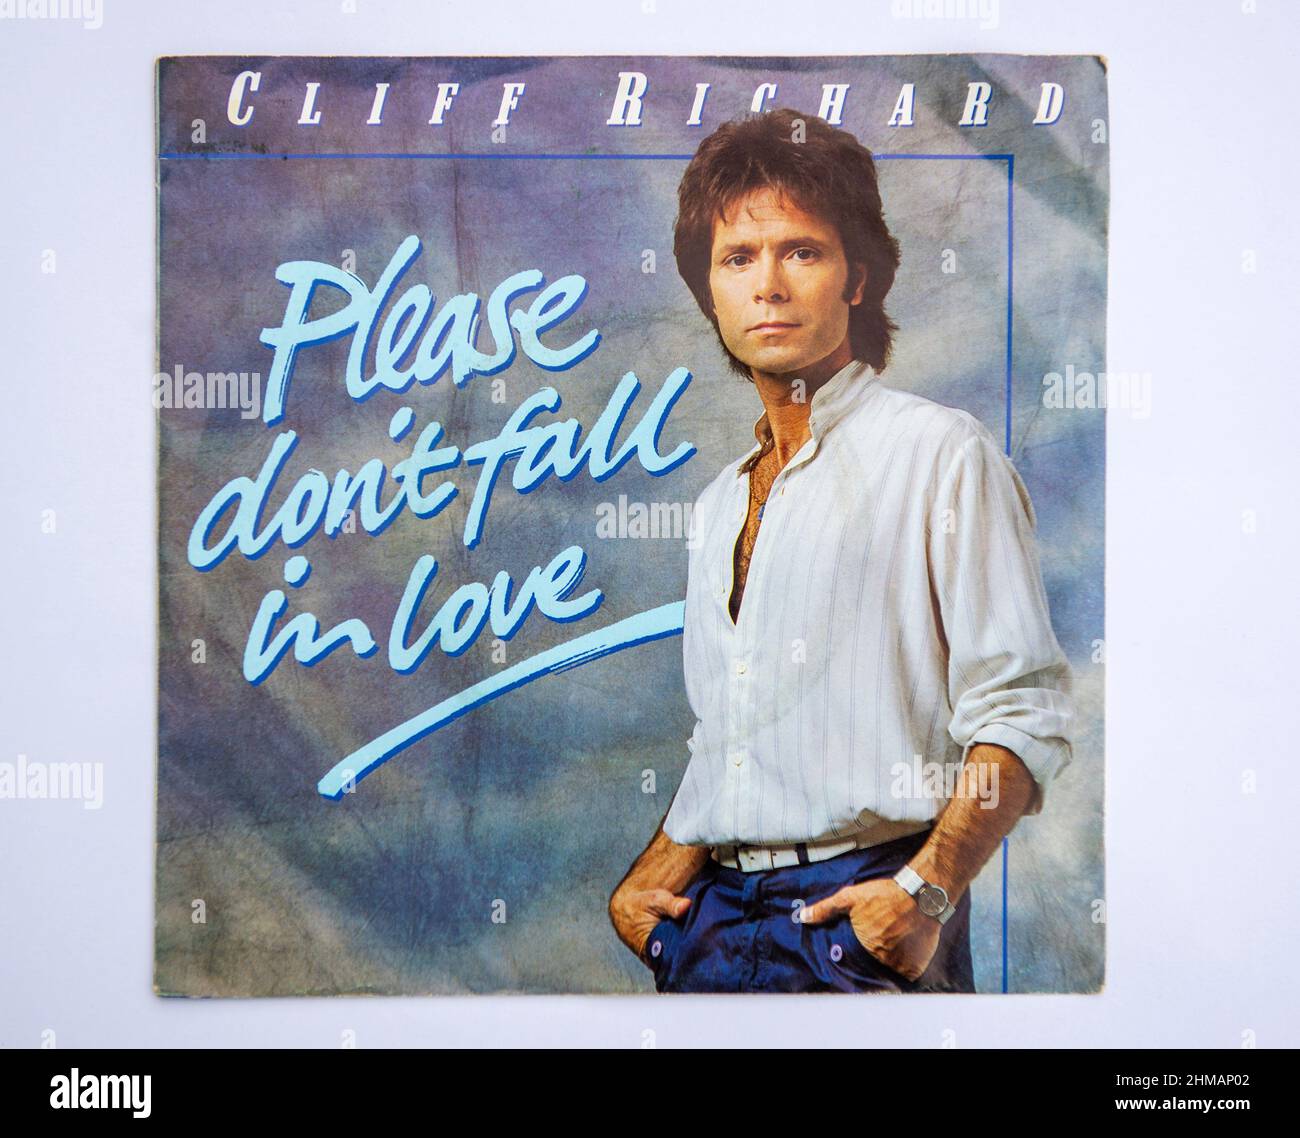 Picture cover of the seven inch single version of Please Don't Fall in Love by Cliff Richard, which was released in 1983. Stock Photo